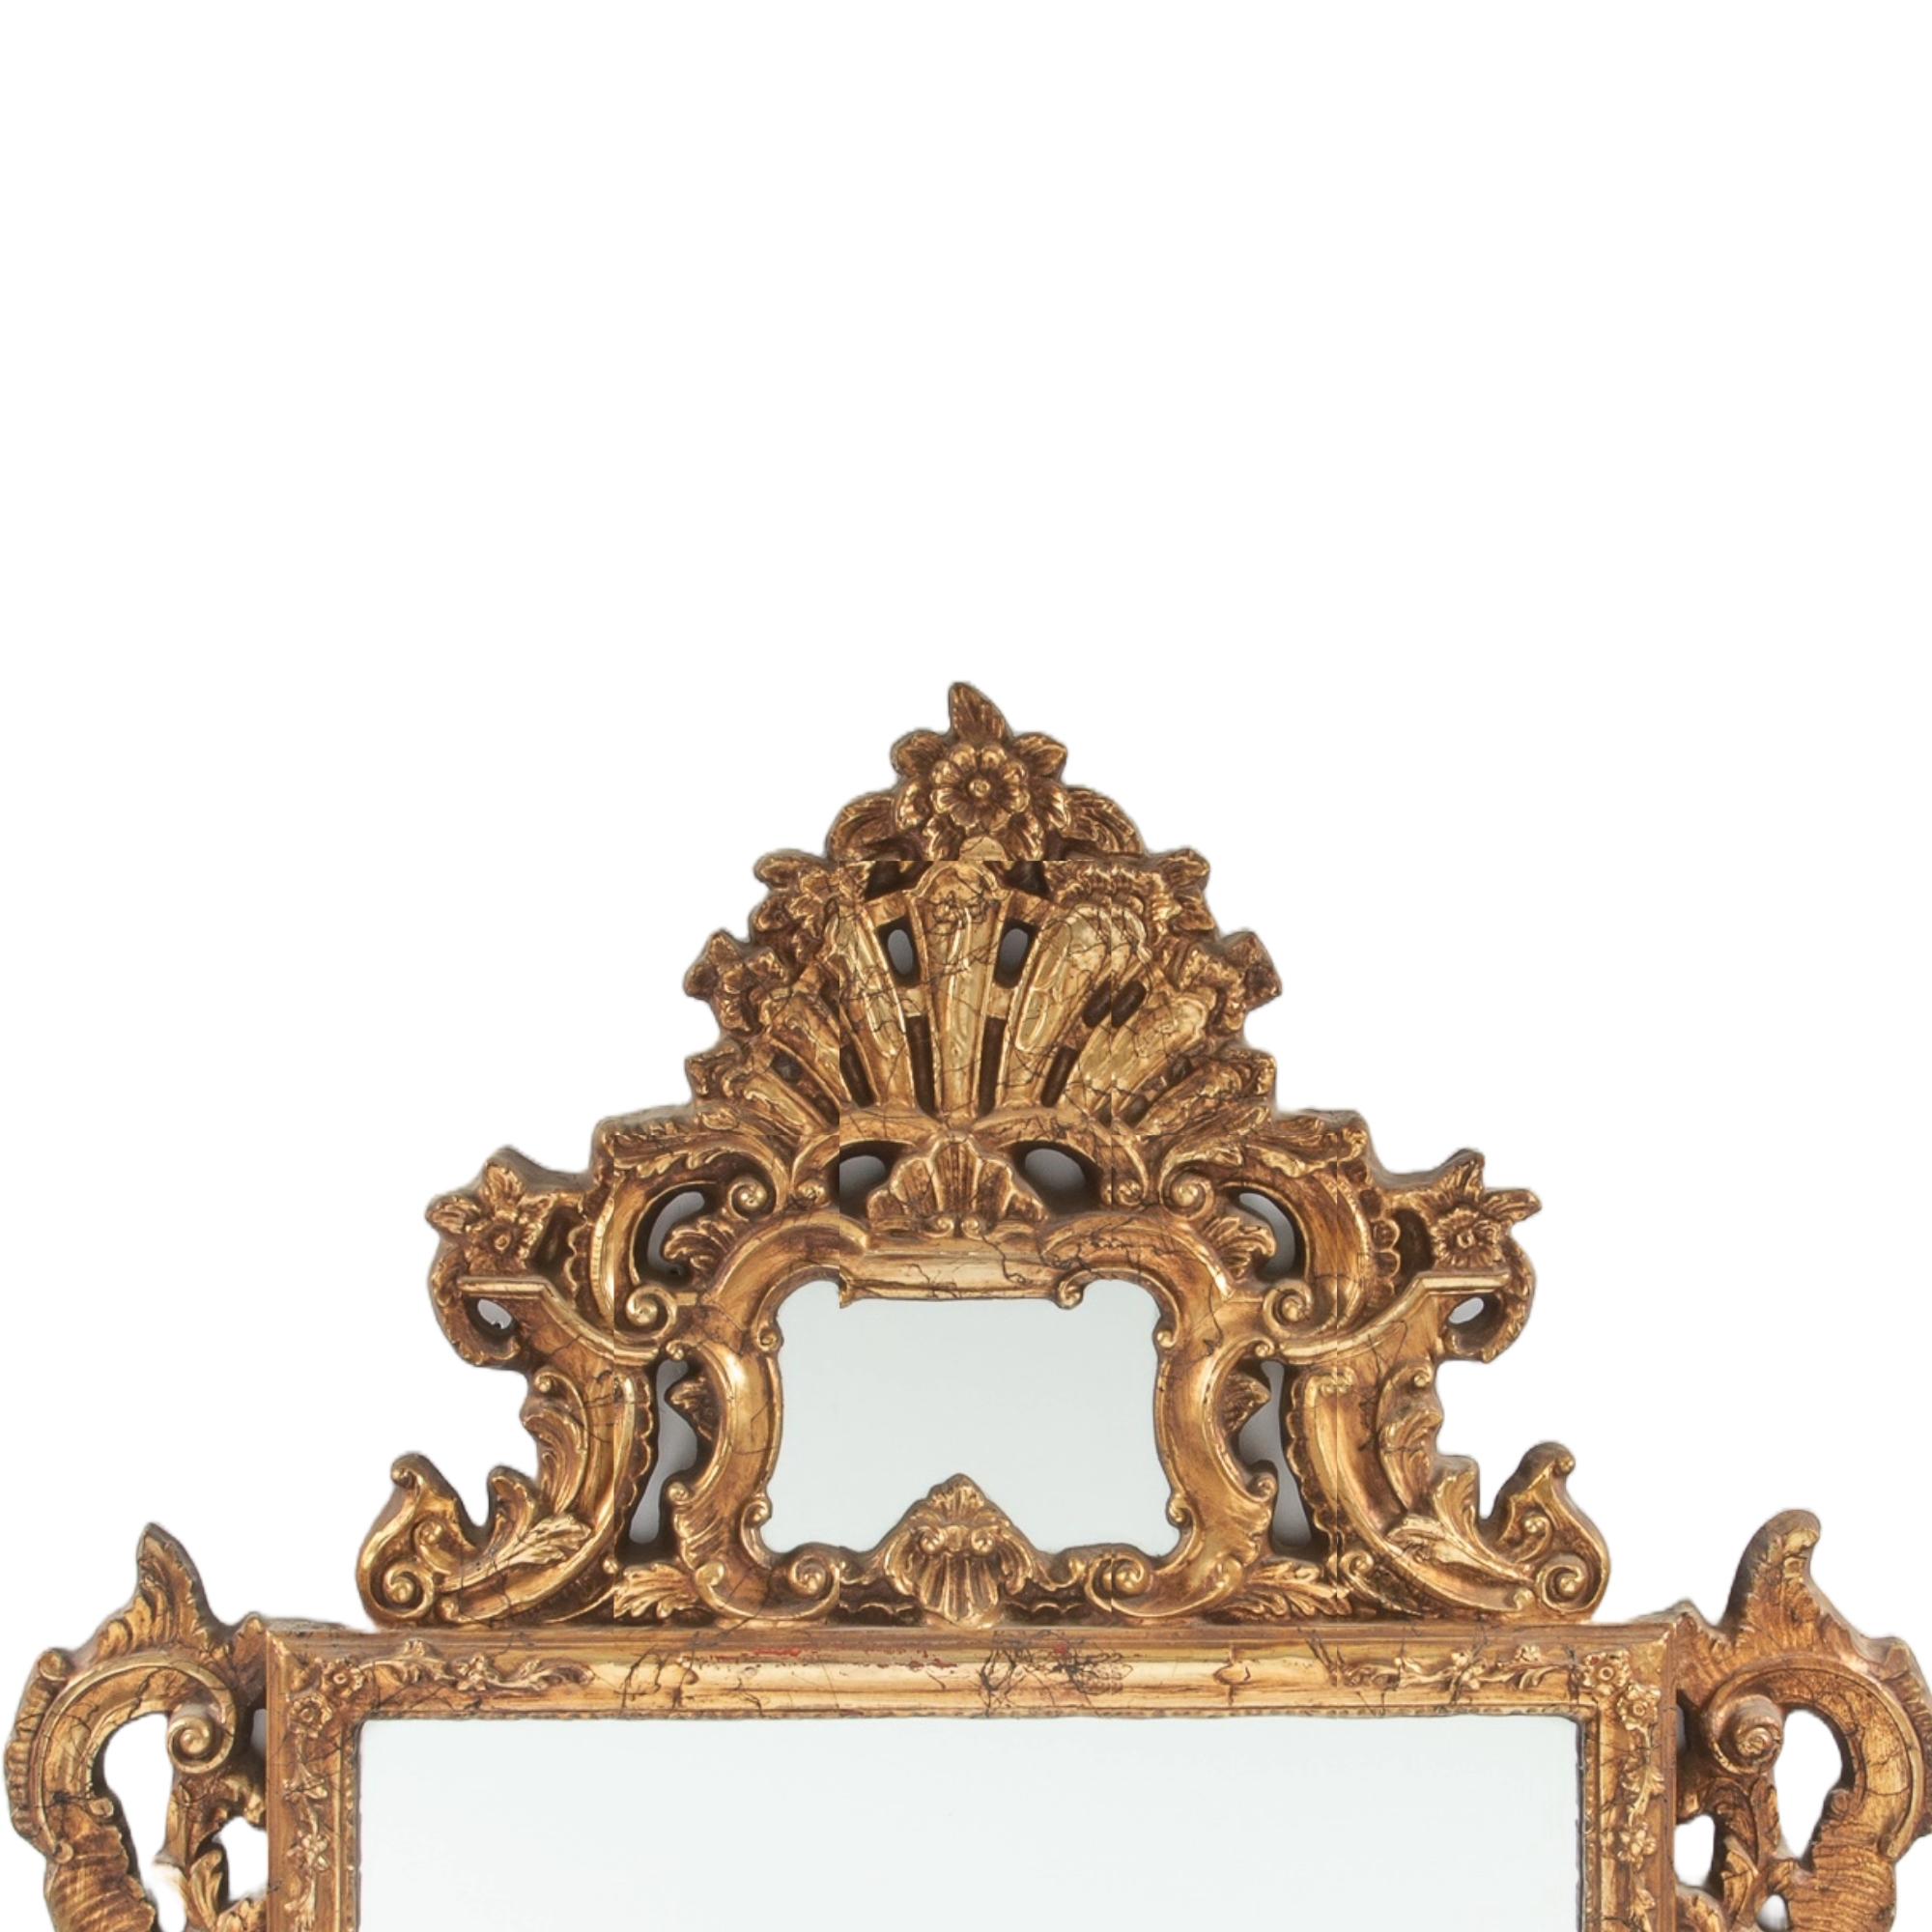 Mid-20th Century Italian Giltwood Frame Rococo Style Mantel/Fireplace Mirror For Sale